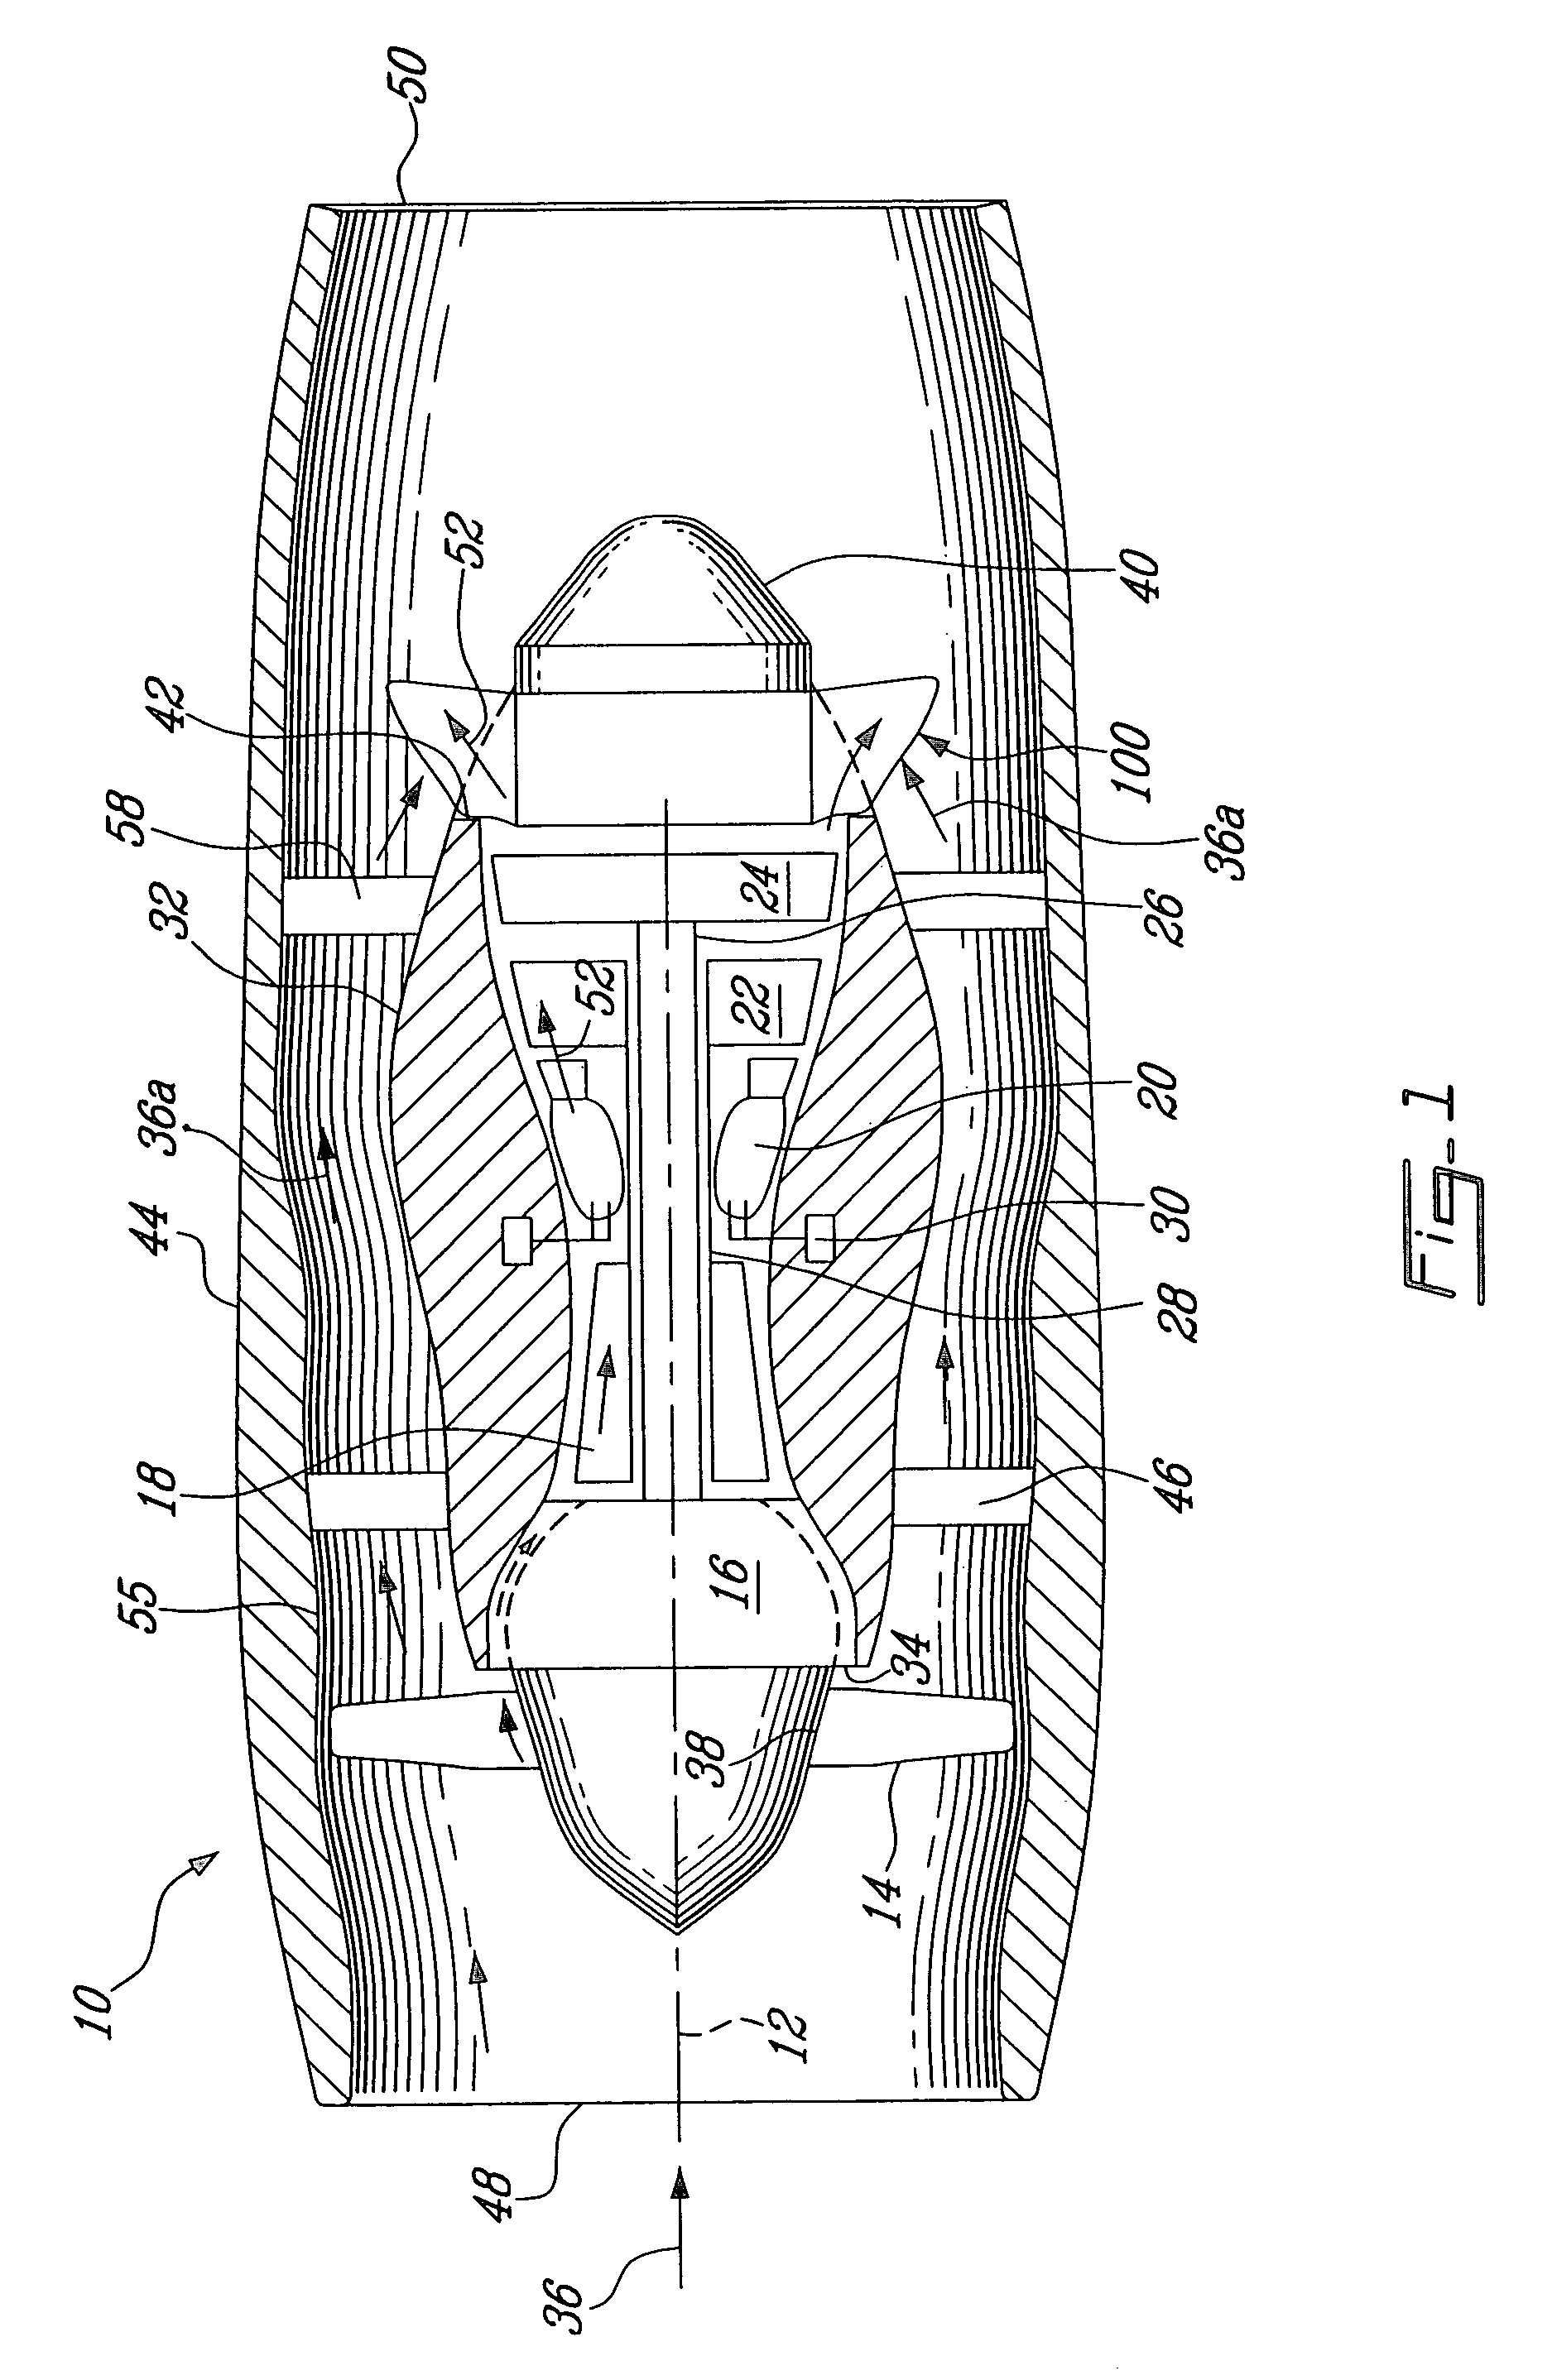 Combined exhaust duct and mixer for a gas turbine engine